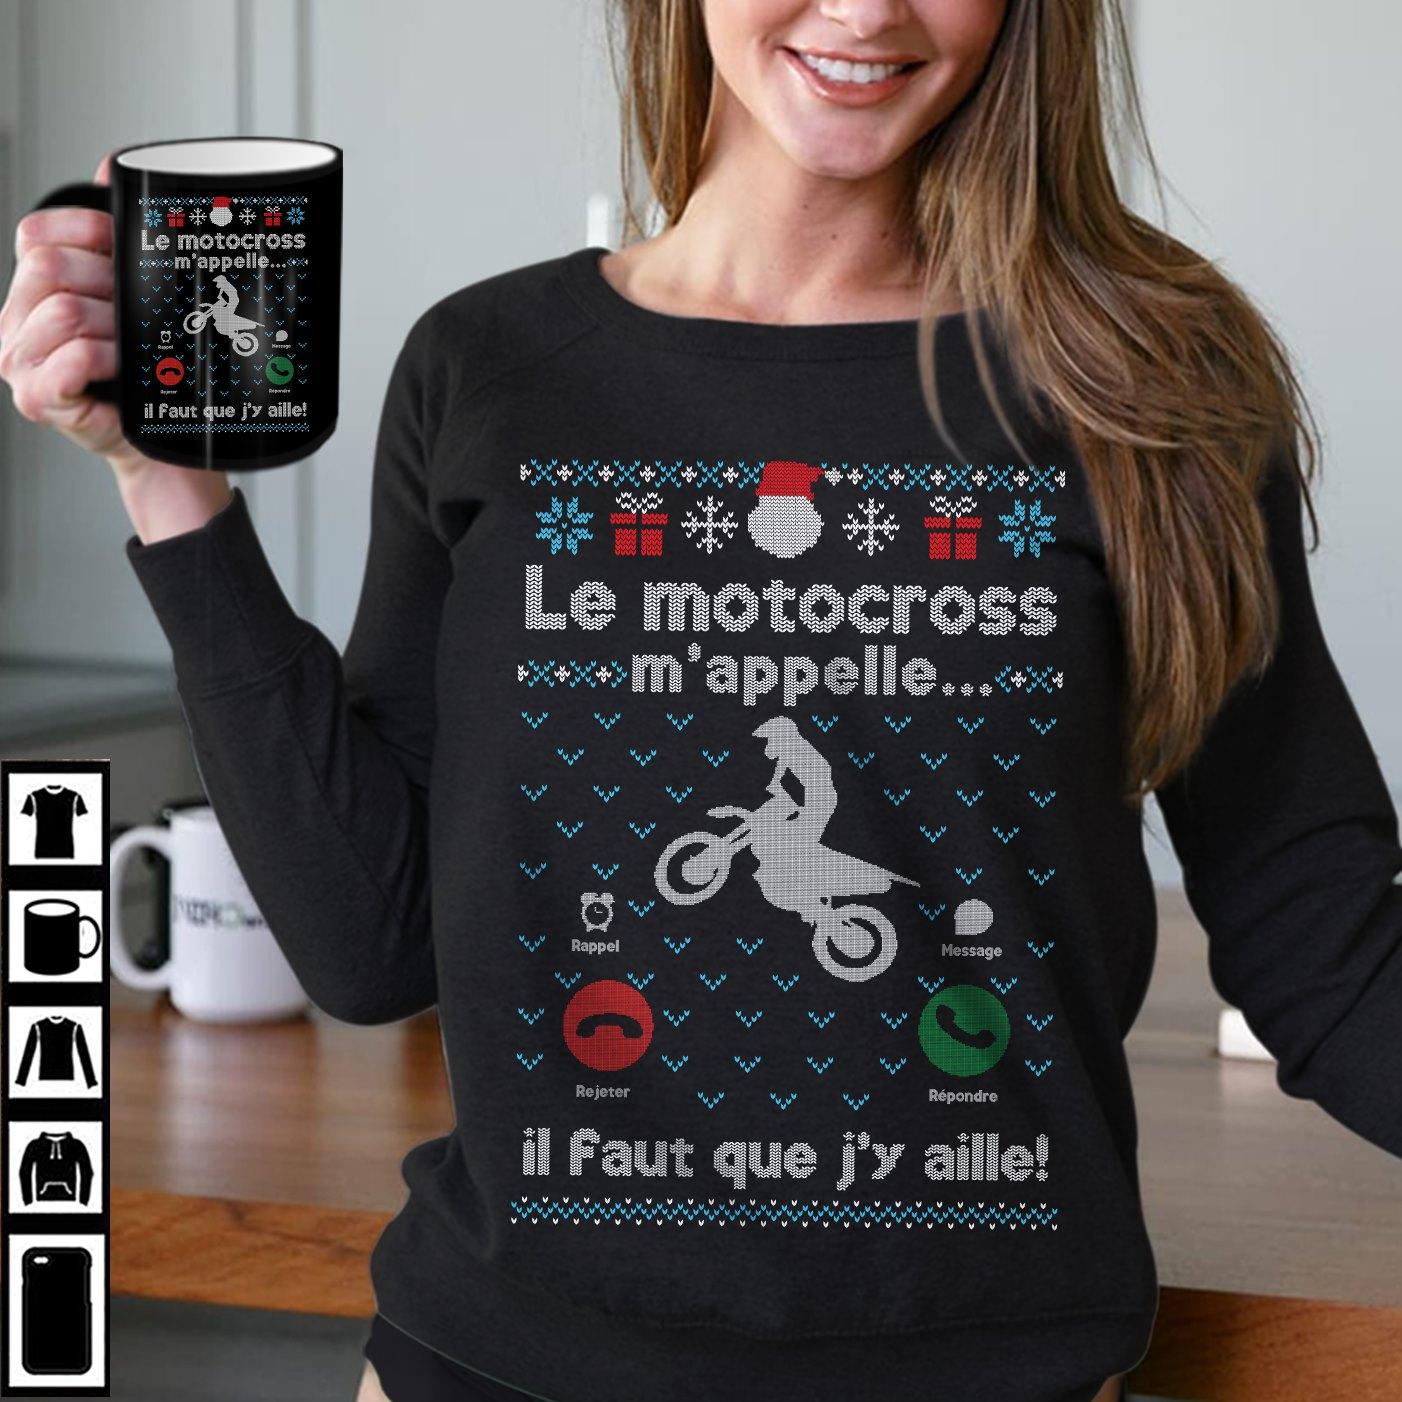 Le motocross m'appelle il faut que j'y aille - Christmas day ugly sweater, Dirt racer's gift